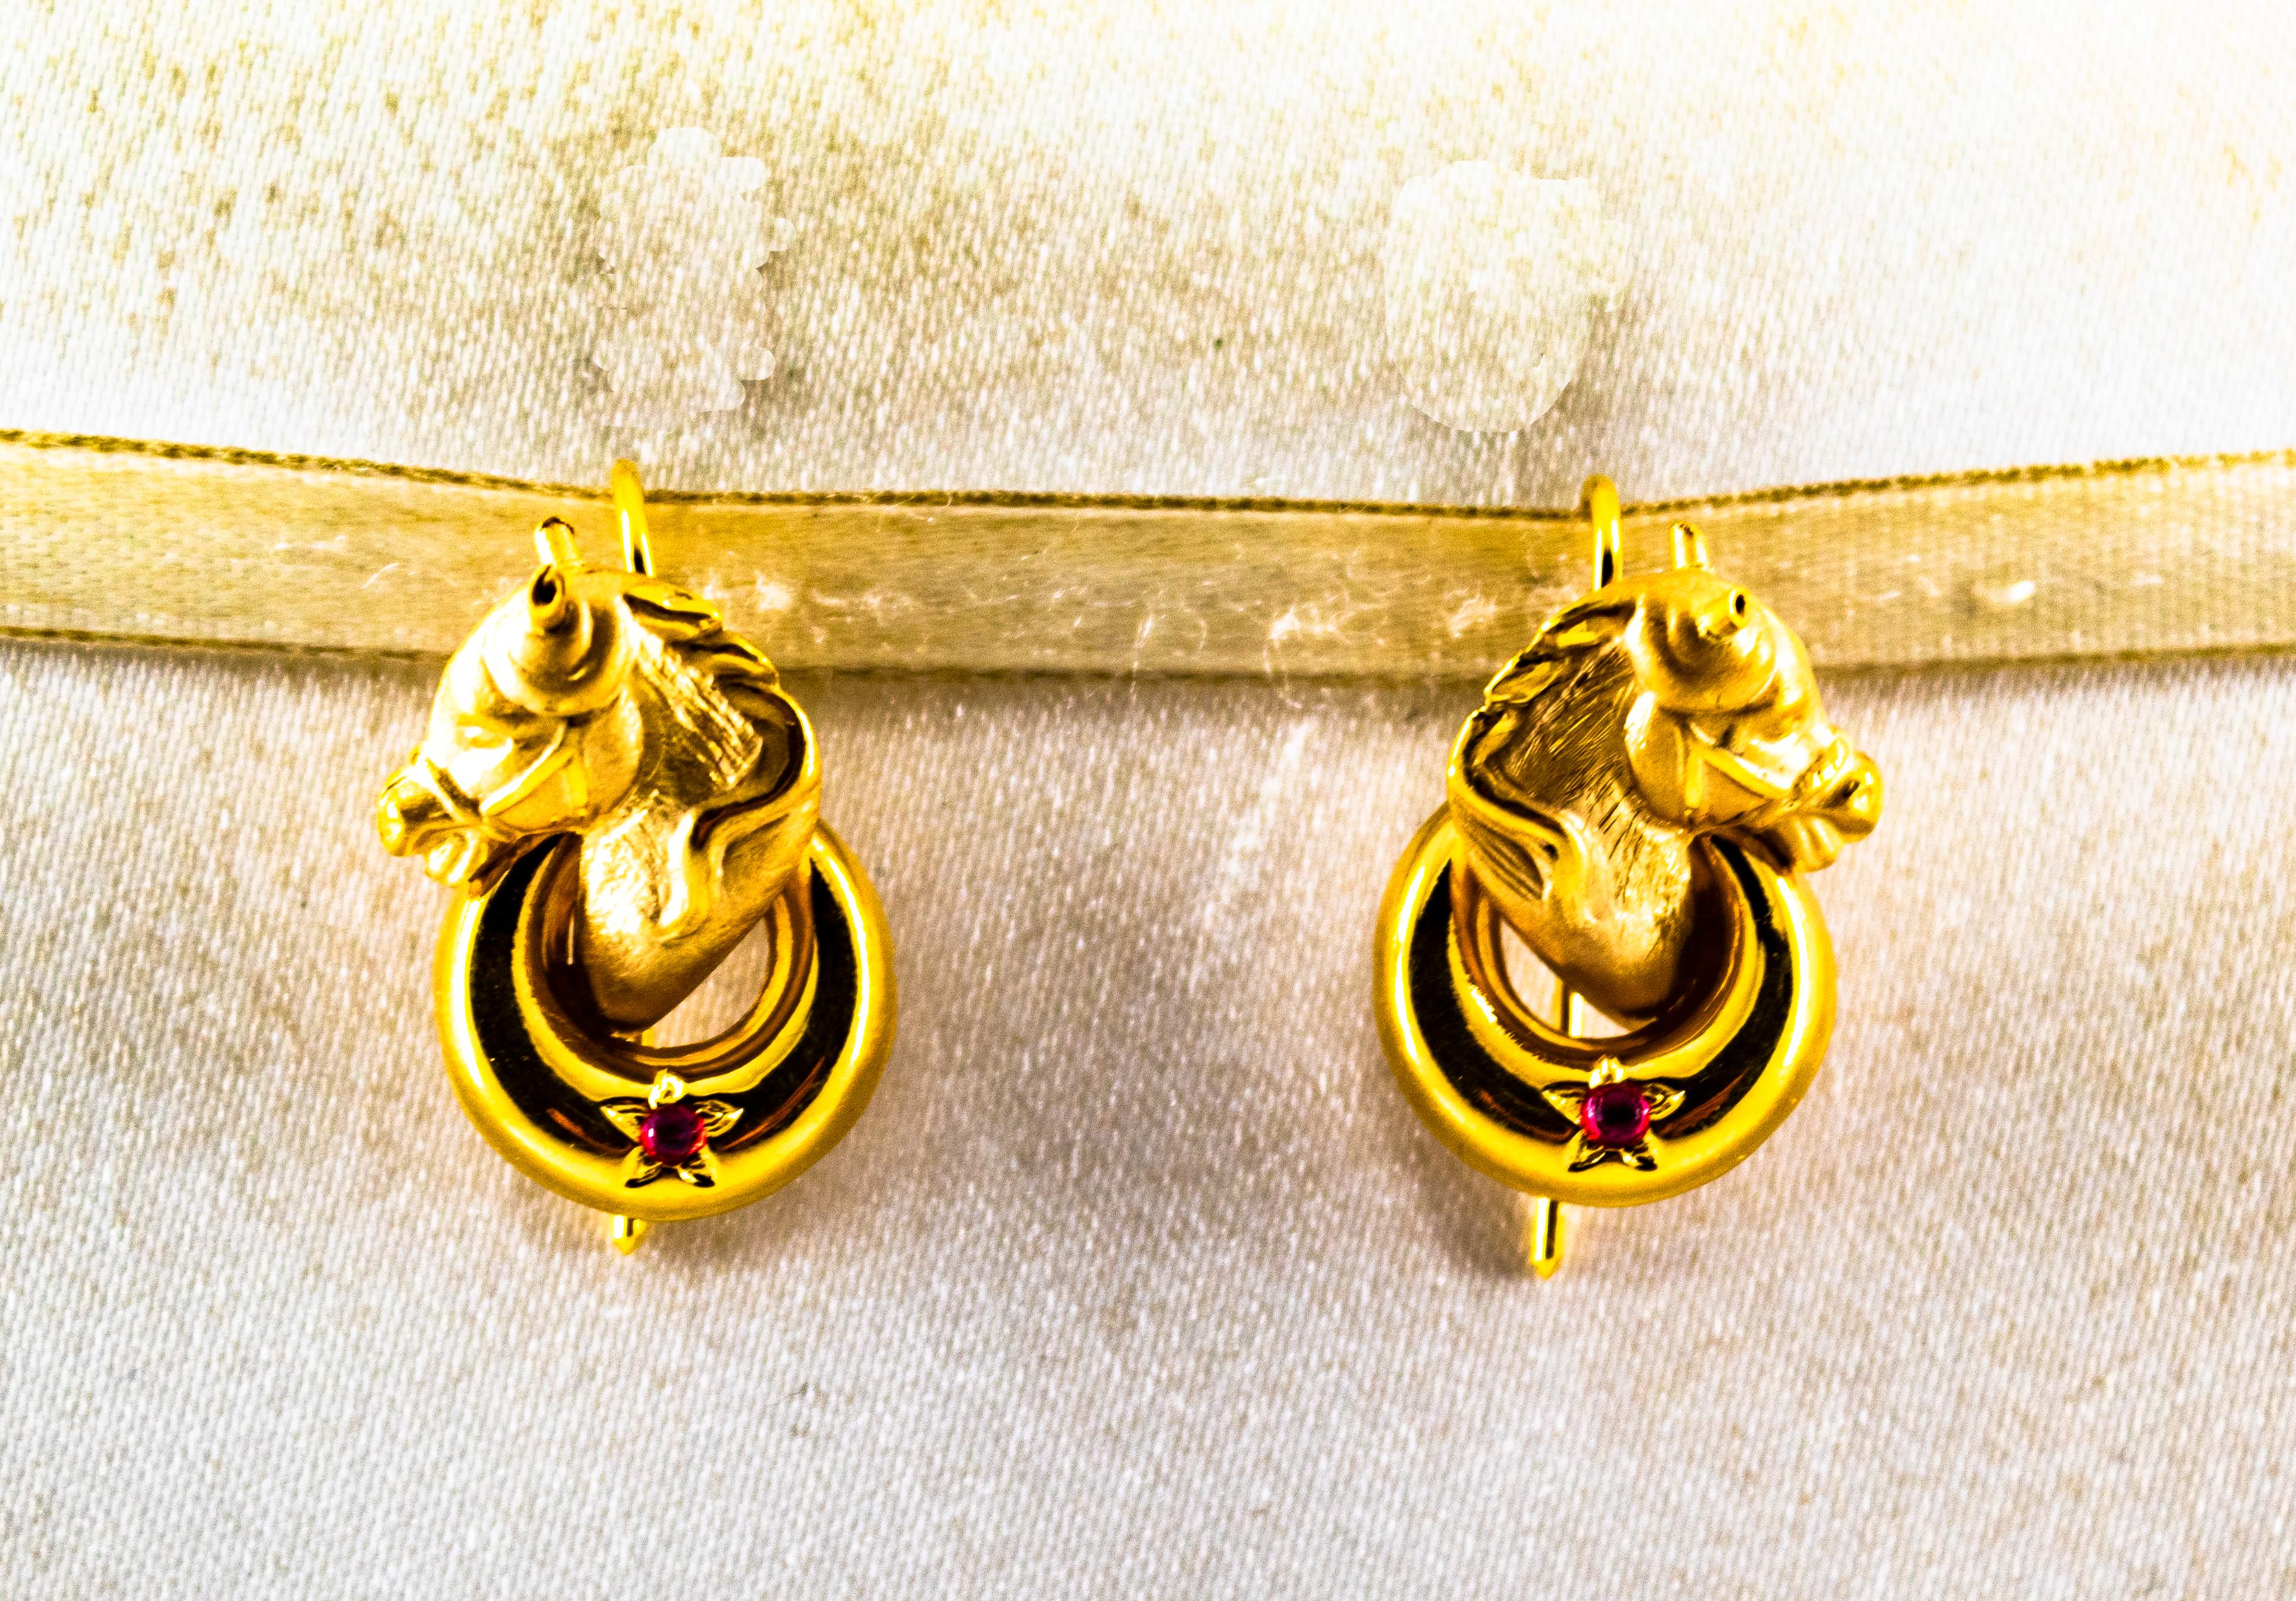 These Earrings are made of 14K Yellow Gold.
These Earrings have 0.10 Carats of Rubies.

All our Earrings have pins for pierced ears but we can change the closure and make any of our Earrings suitable even for non-pierced ears.
We're a workshop so